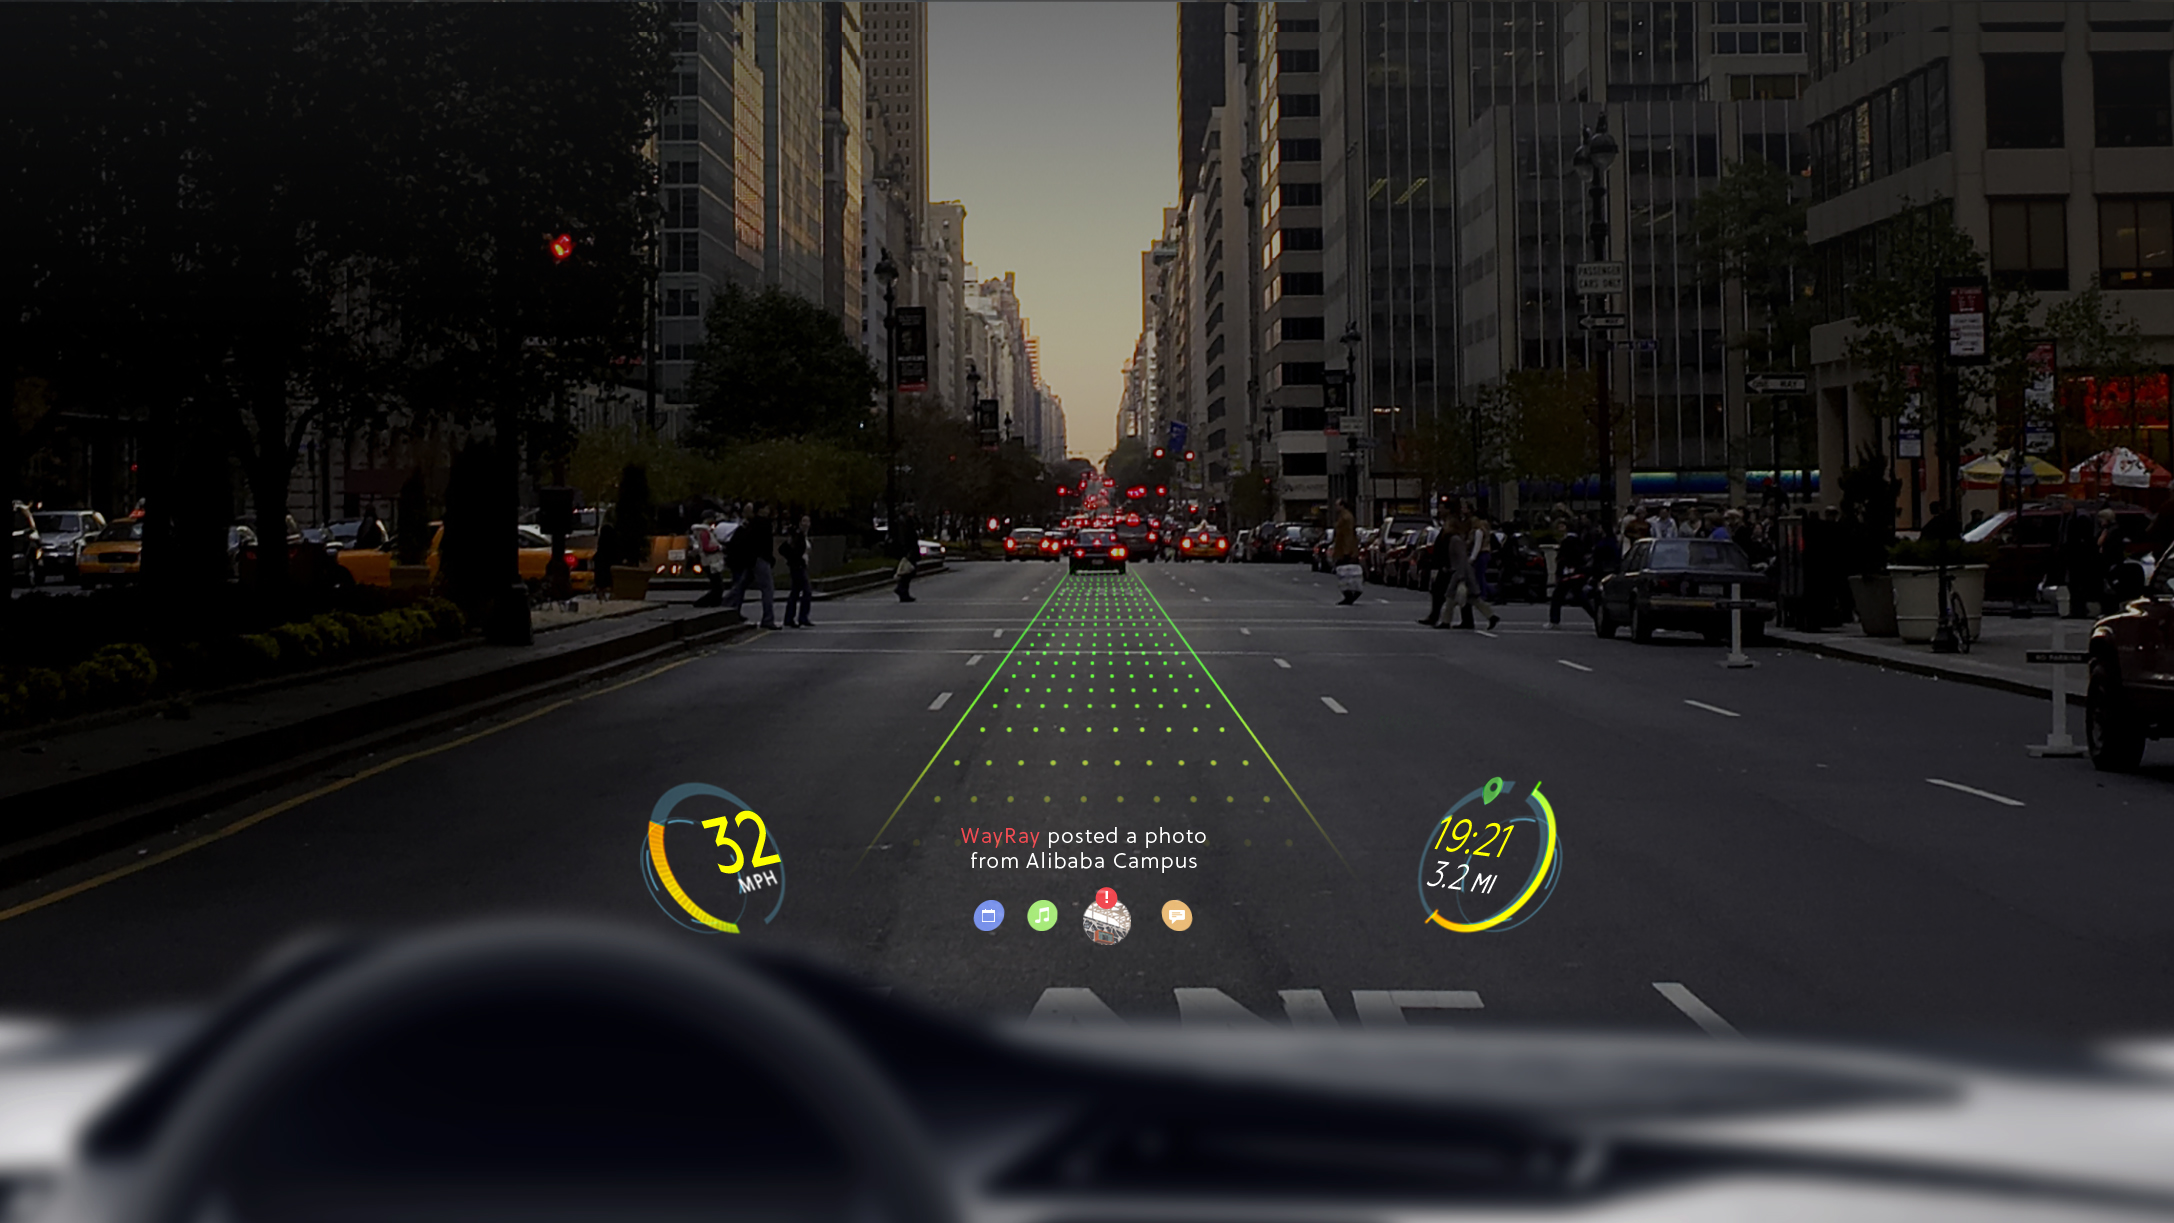 Microsoft and VW work together to bring augmented-reality into cars.